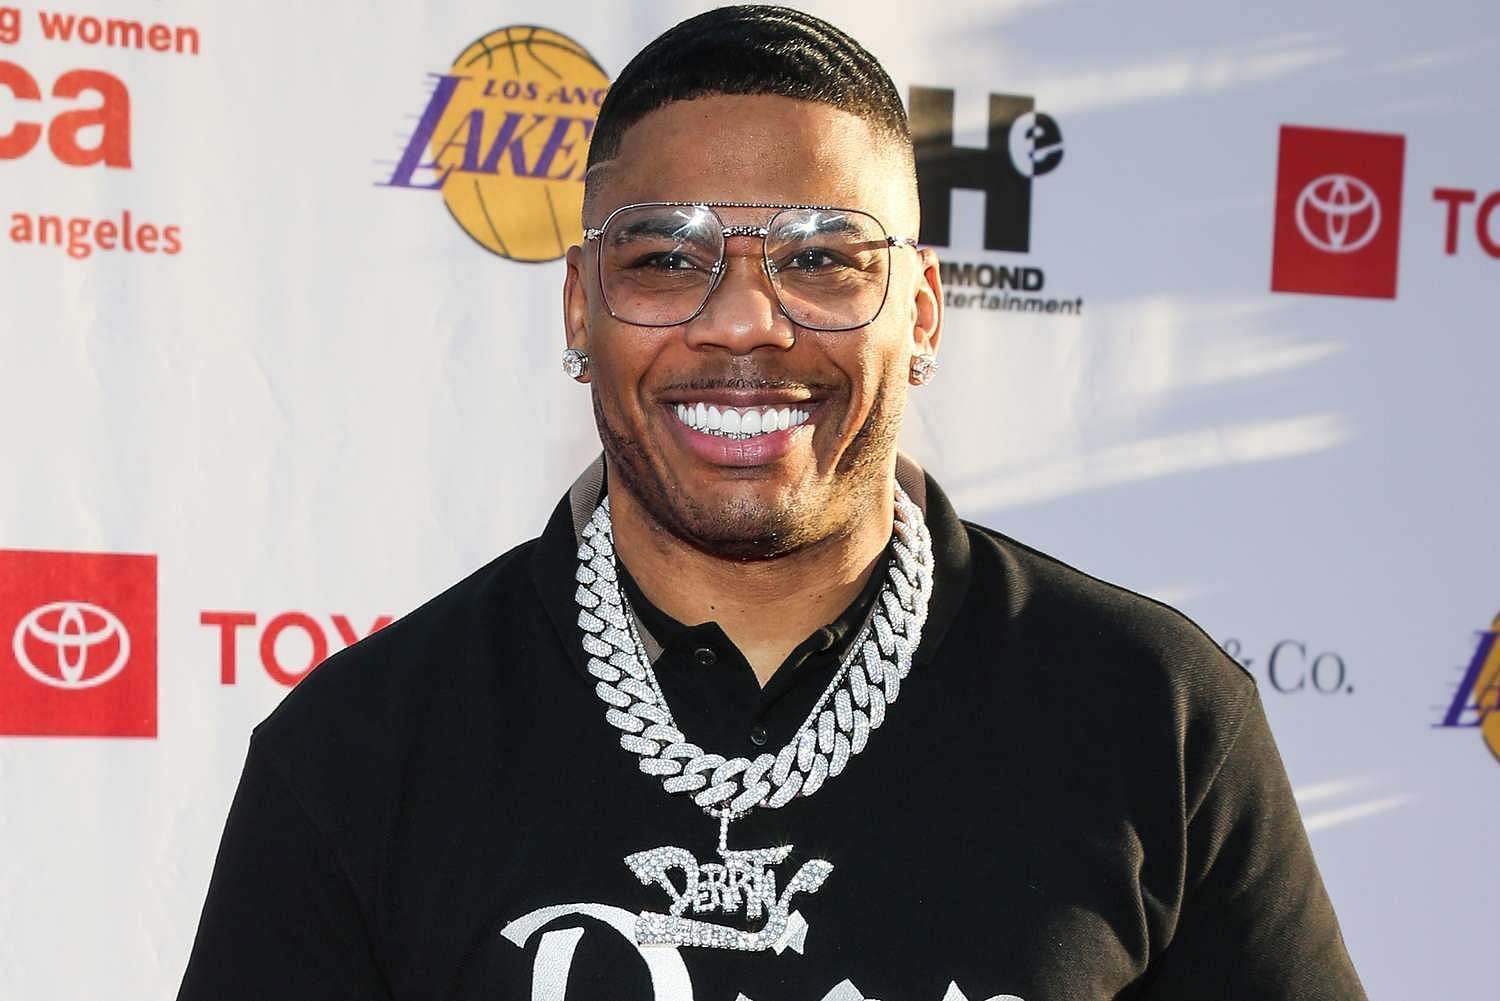 Nelly is headlining the next LIV Golf tournament